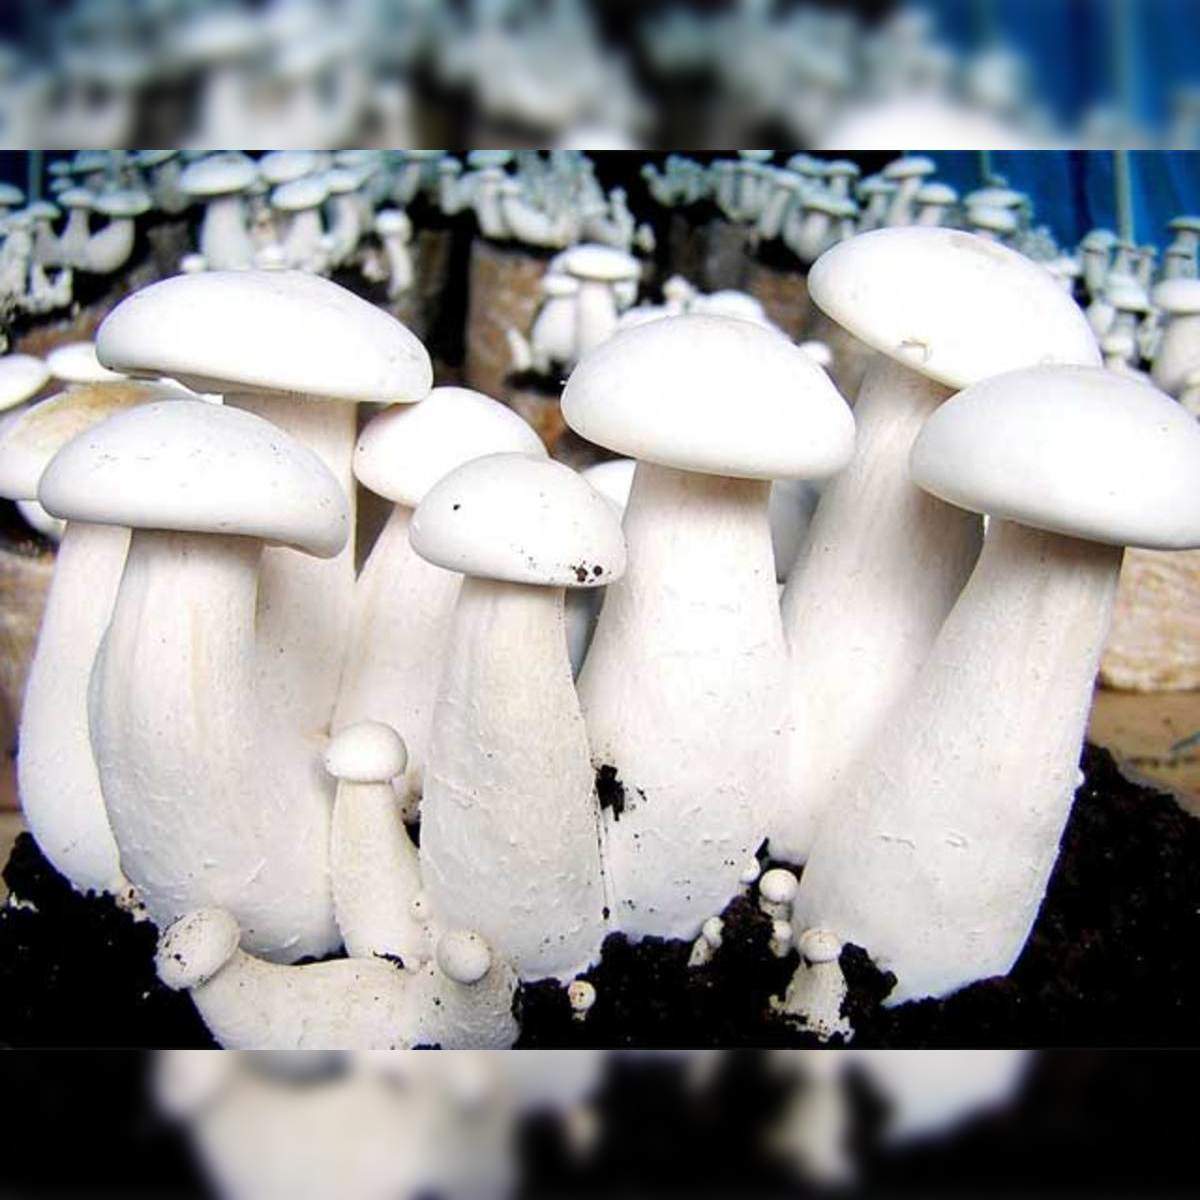 Scientists find why some mushrooms glow in dark - The Economic